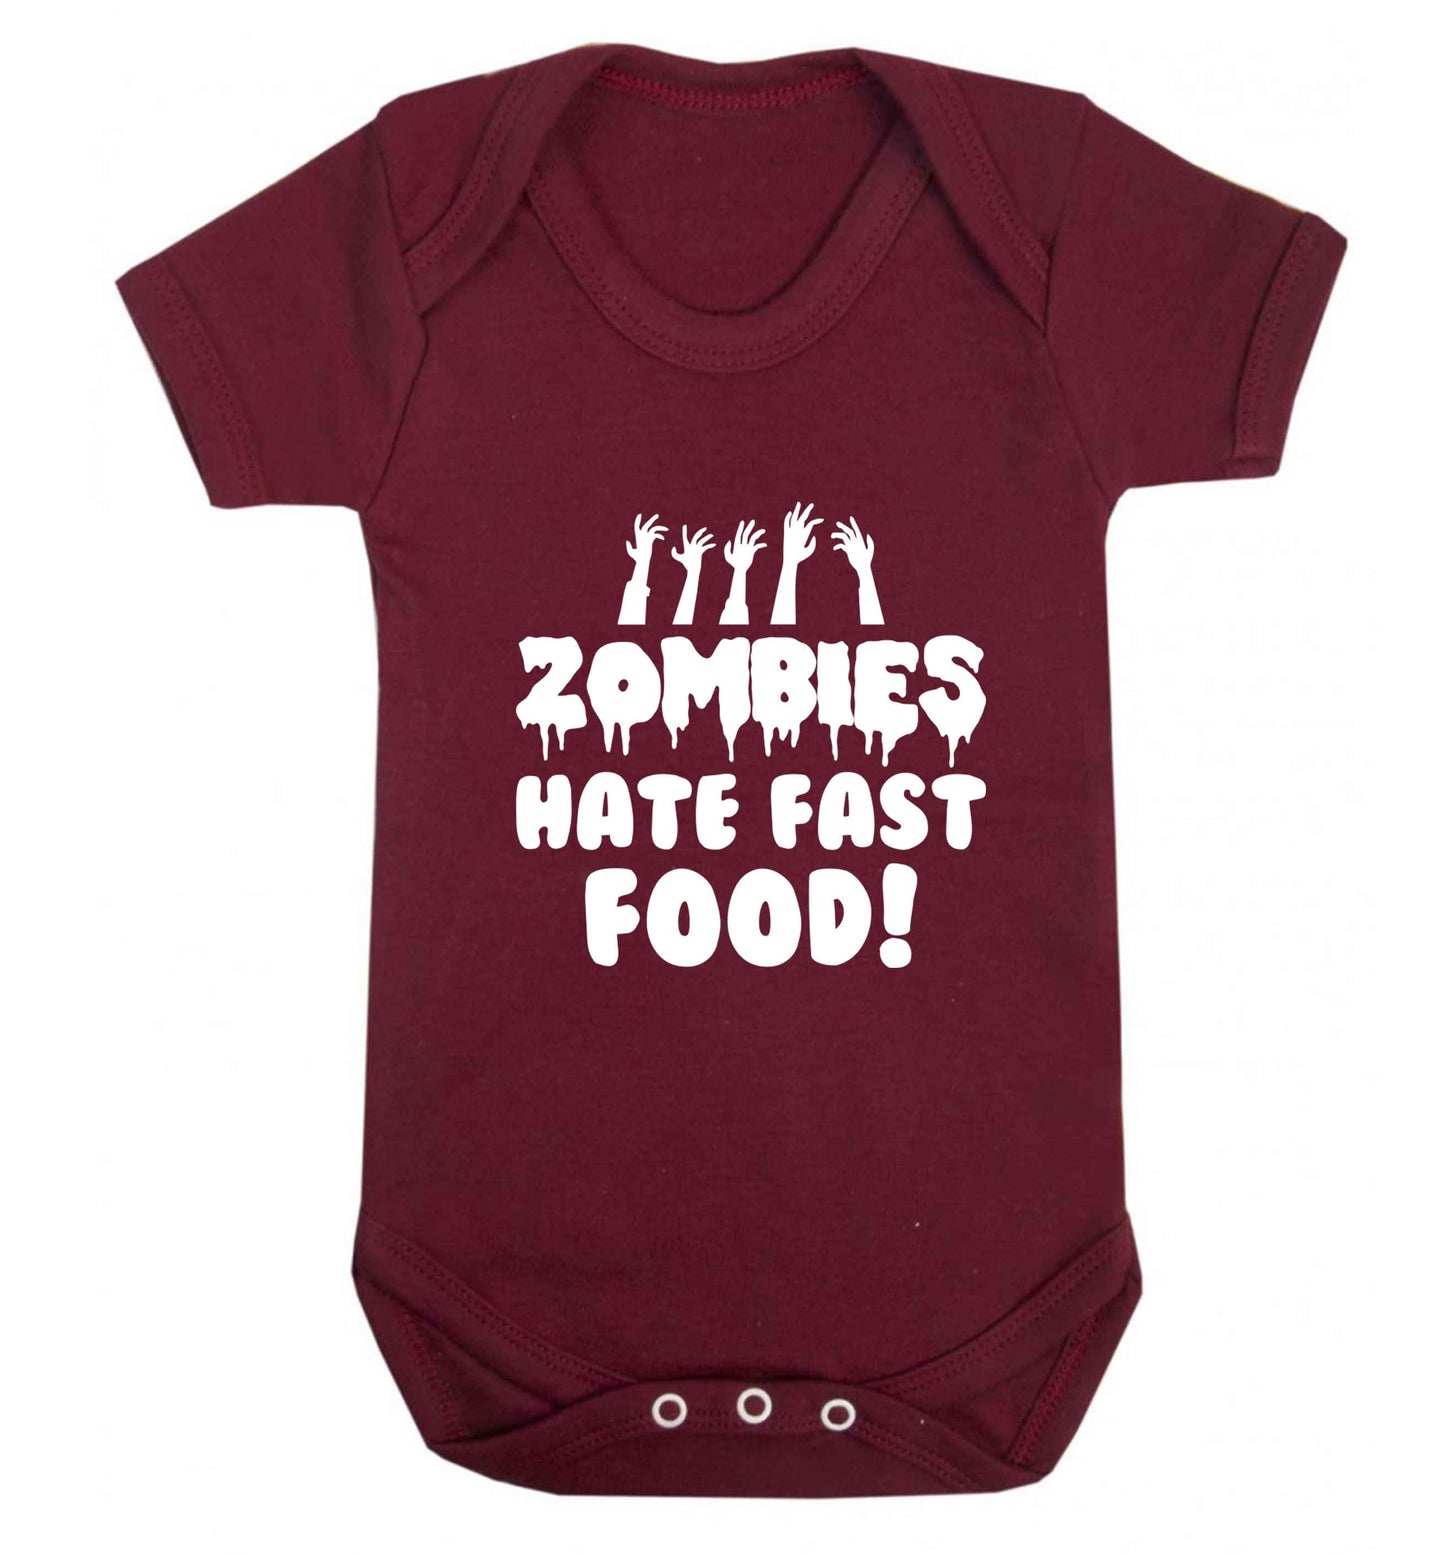 Zombies hate fast food baby vest maroon 18-24 months